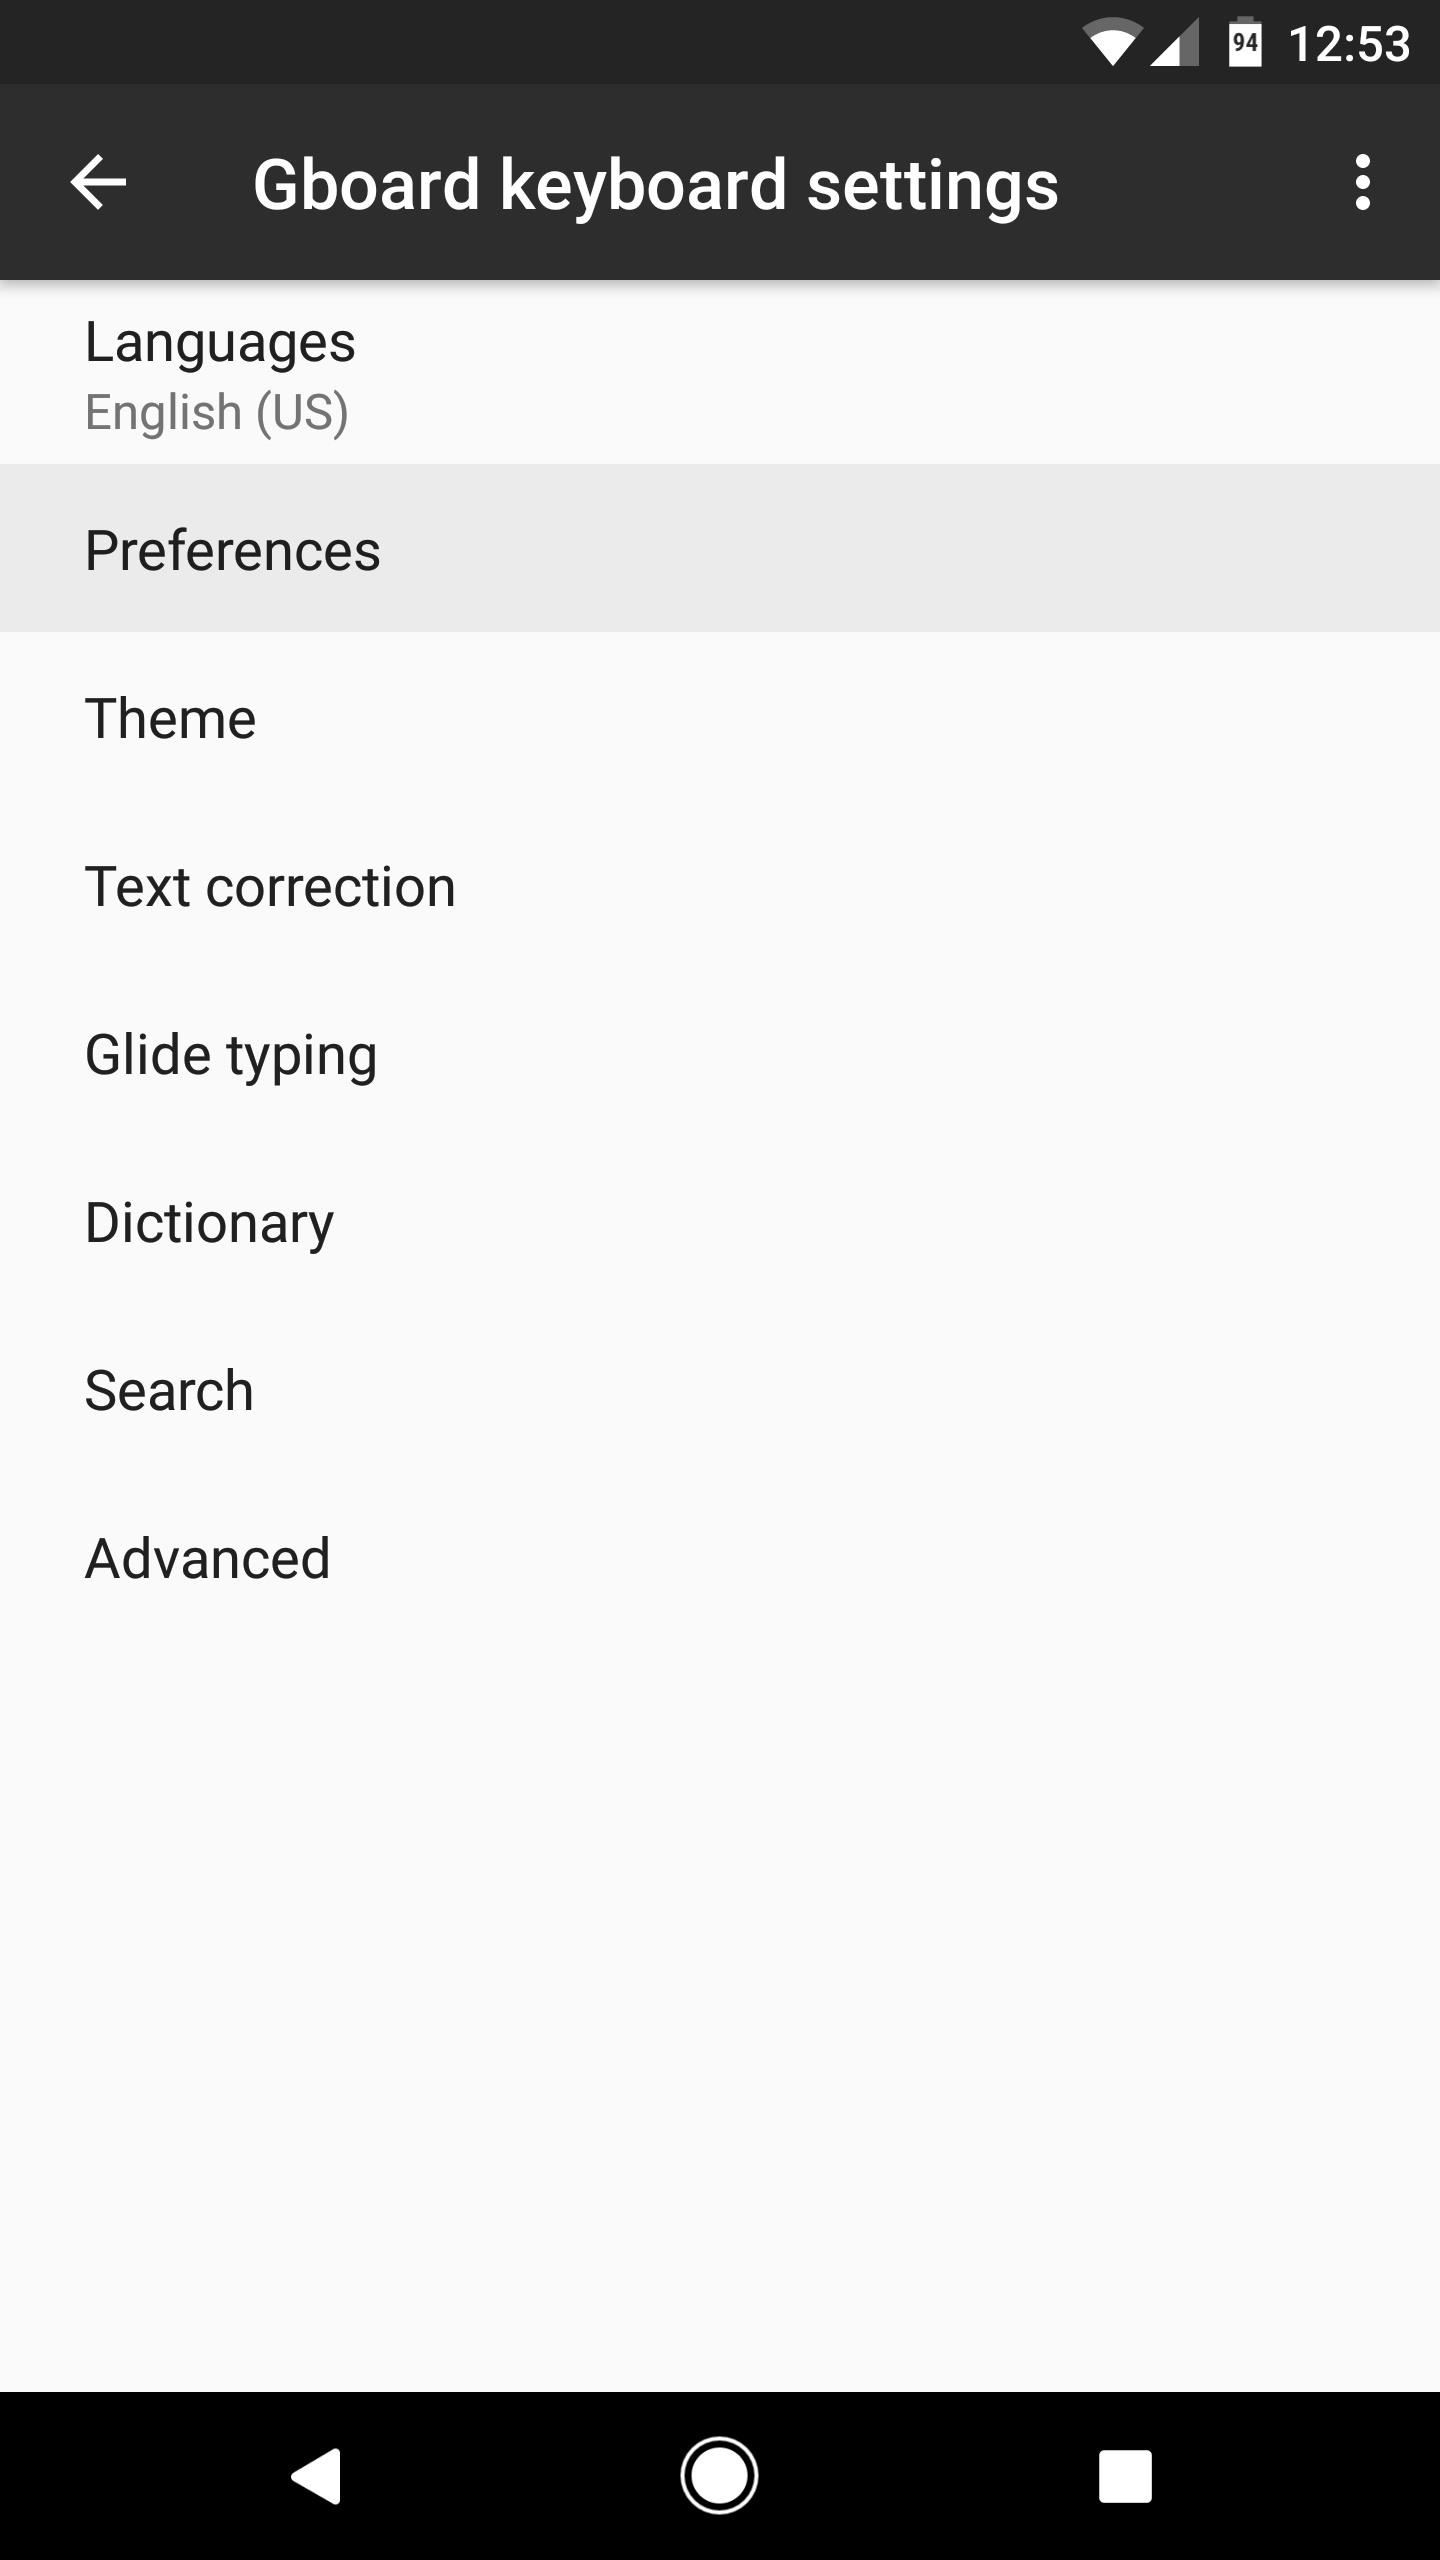 How to Add a Number Row to Google's Gboard Keyboard